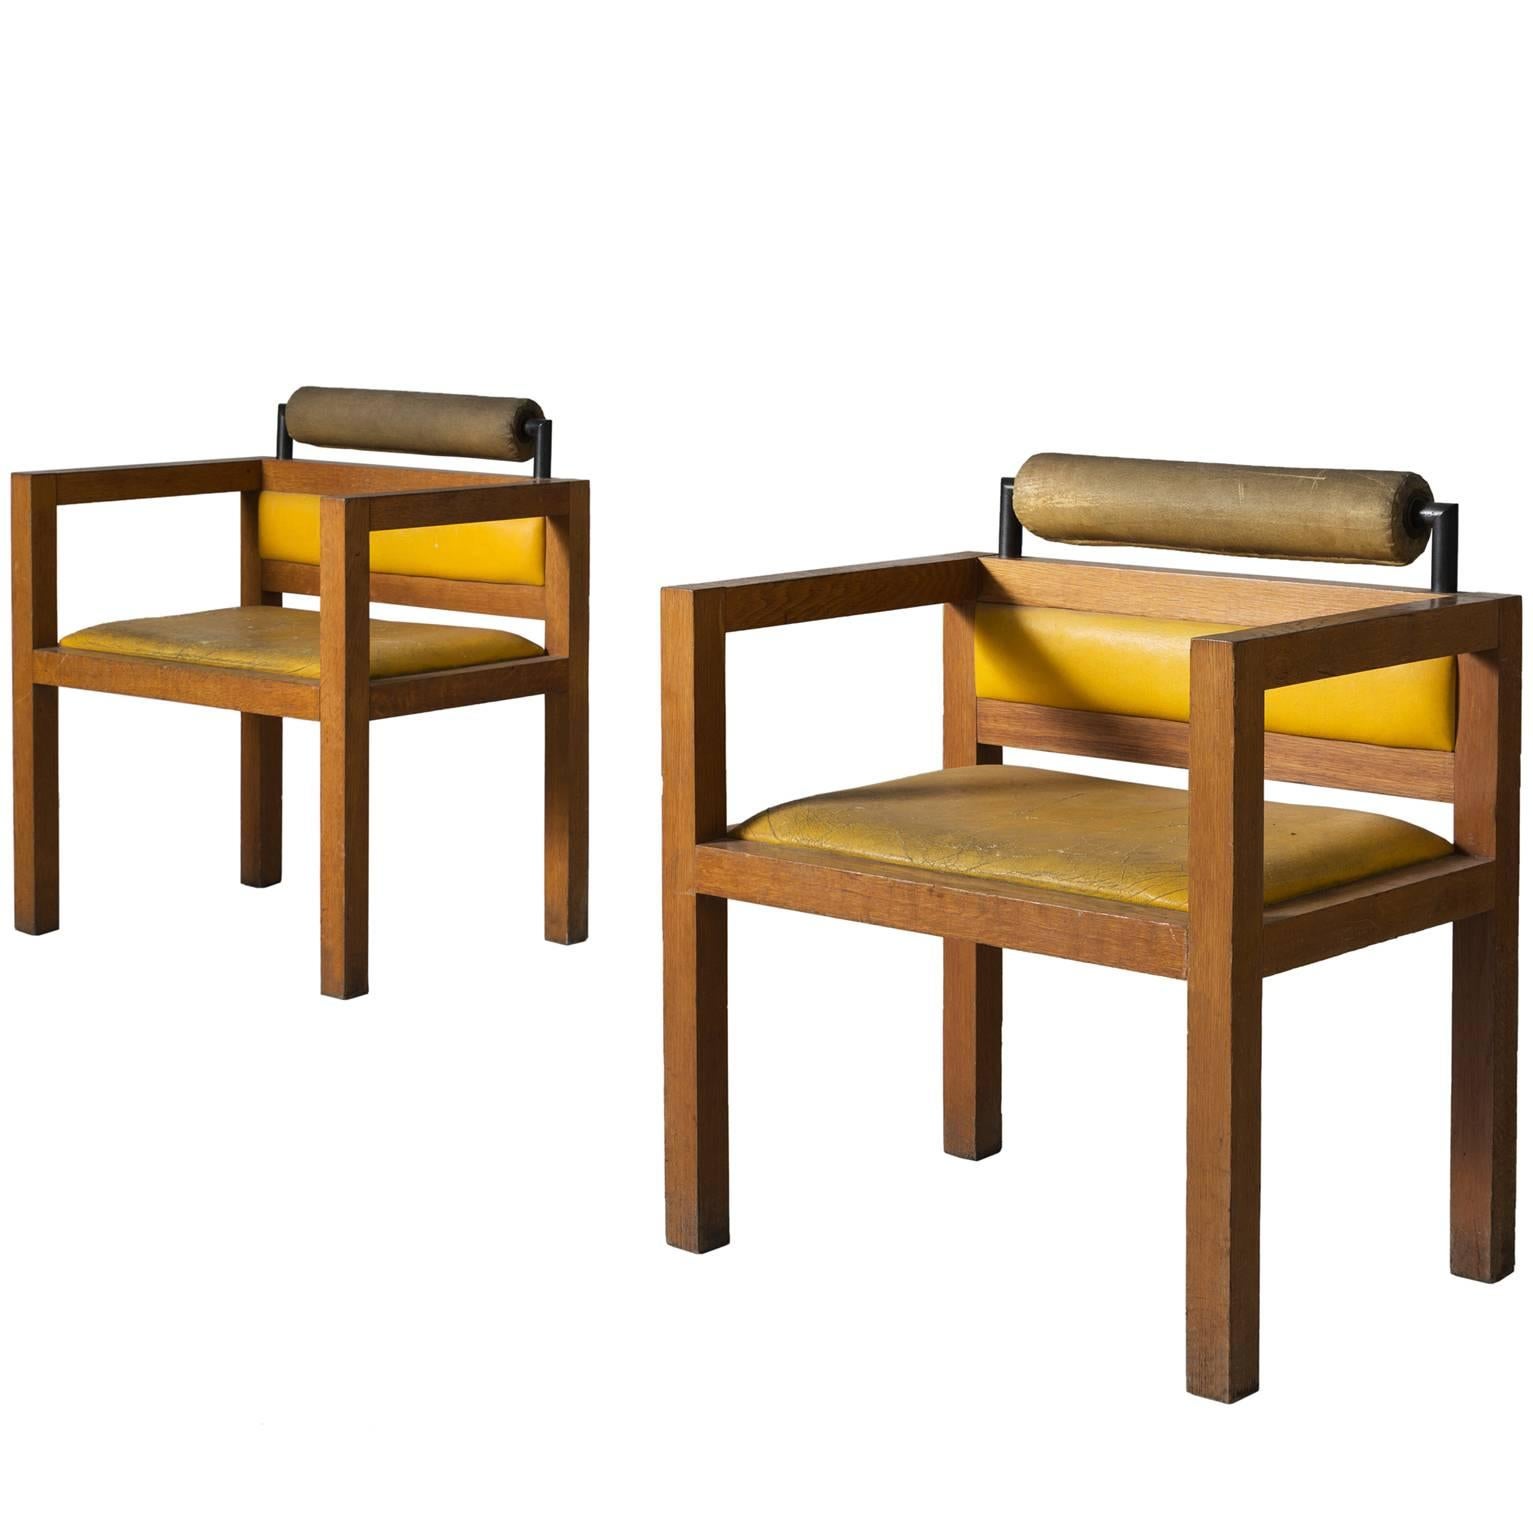 Set of Two Cubic Armchairs in Oak and Yellow Leather Upholstery